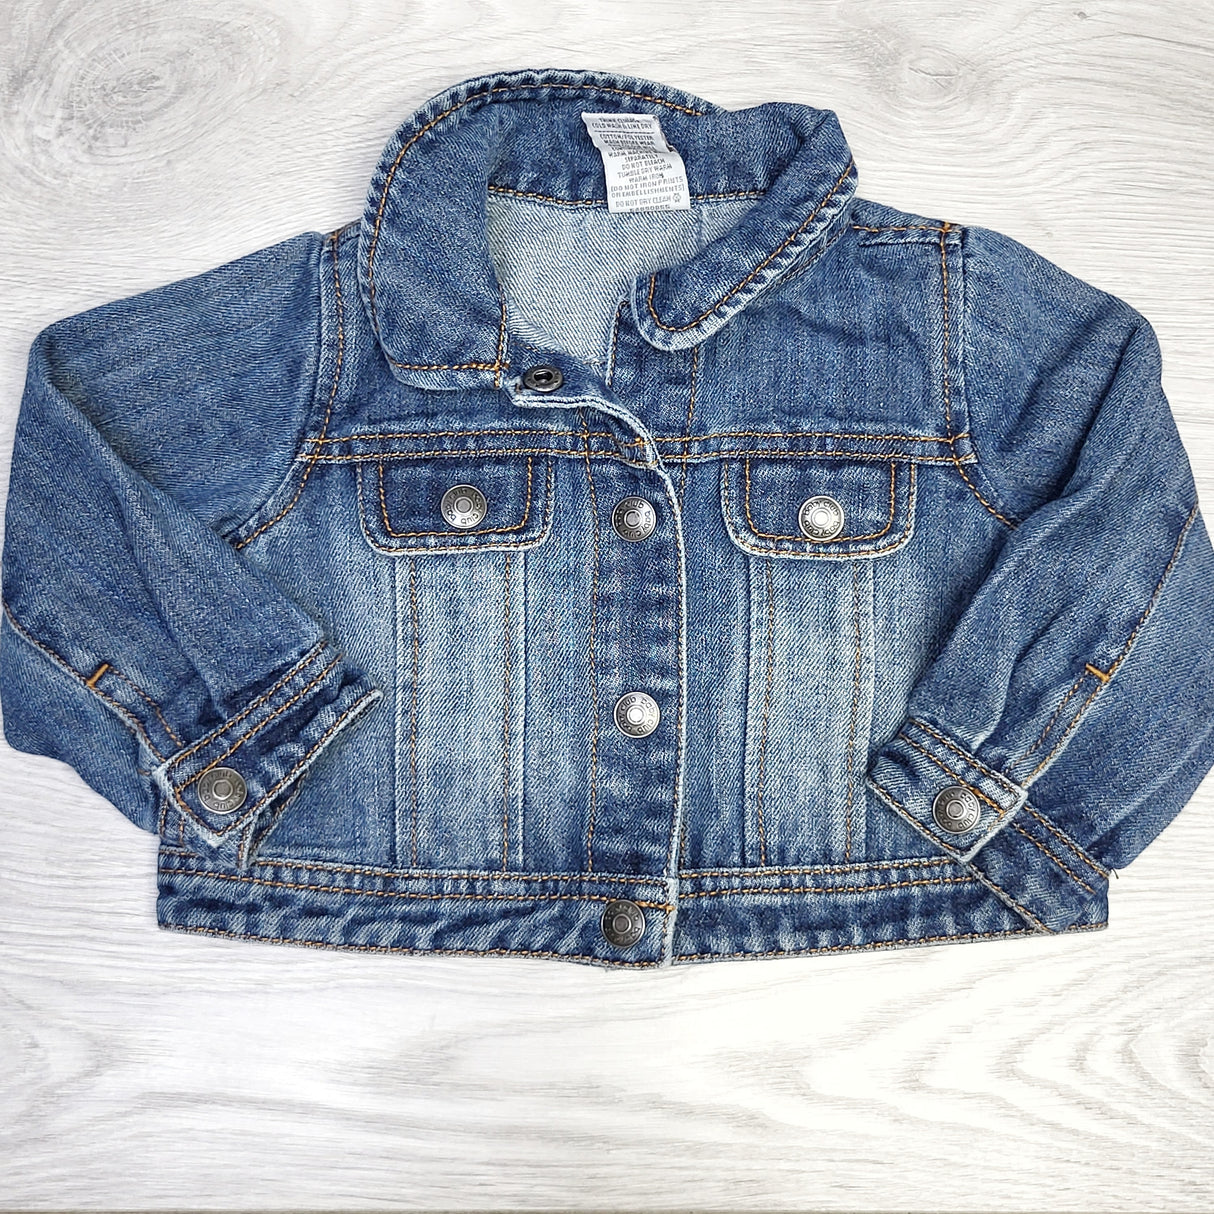 MSNDS1 - Baby Club denim jacket with snap buttons. Size 6-12 months